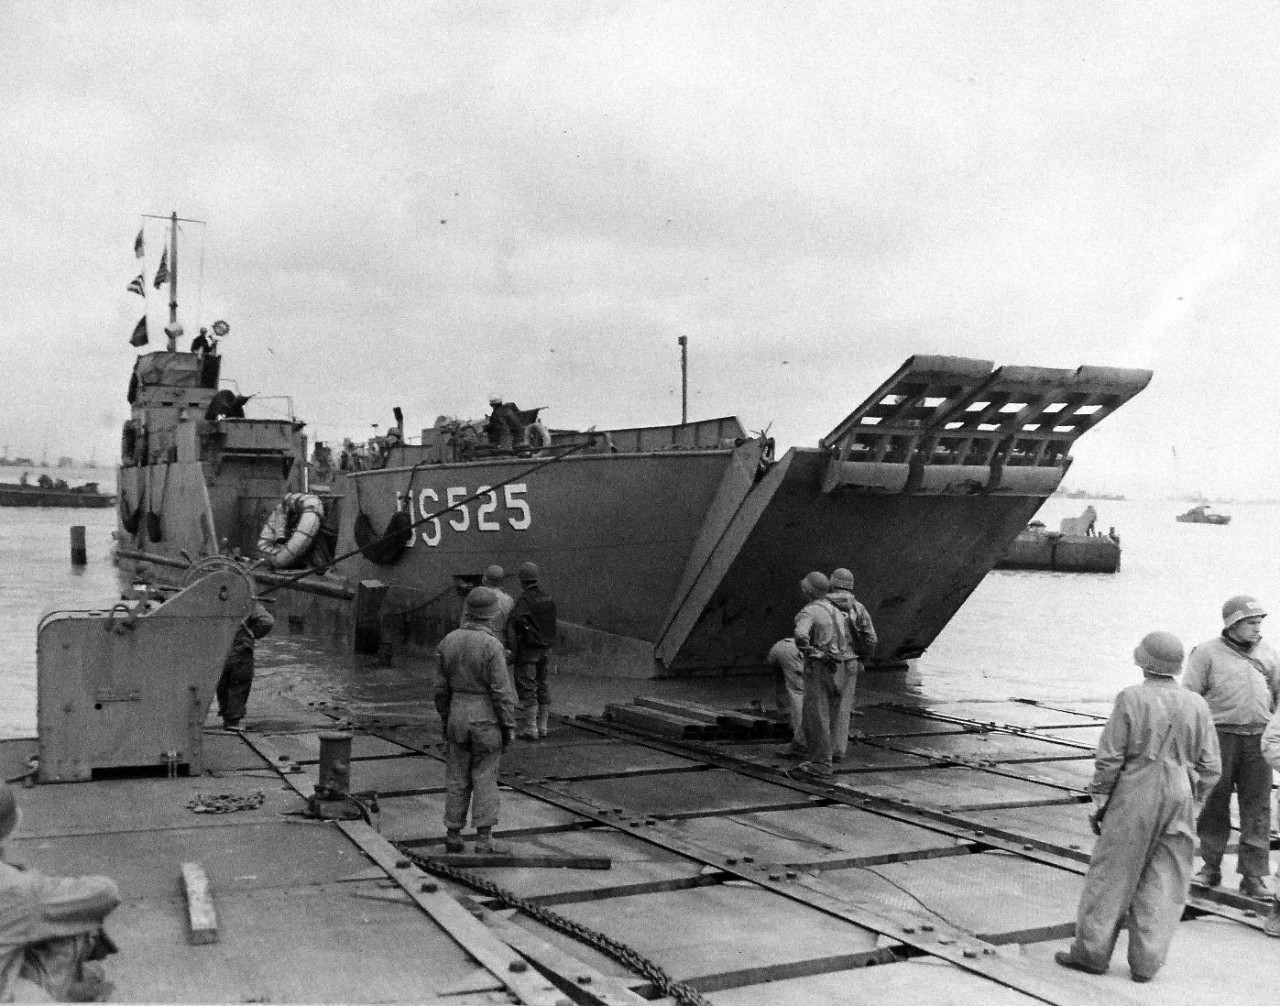 80-G-285138:  Normandy Invasion, Mulberries, June 1944.     The pontoon causeway at “Omaha” beach, forming part of the U.S. Mulberry the man-made harbor off coast of France, built to protect landing craft from storms in English Channel.  Note LCT 525. Photograph released November 7, 1944.  Official U.S. Navy photograph, now in the collections of the National Archives.  (2016/03/15).